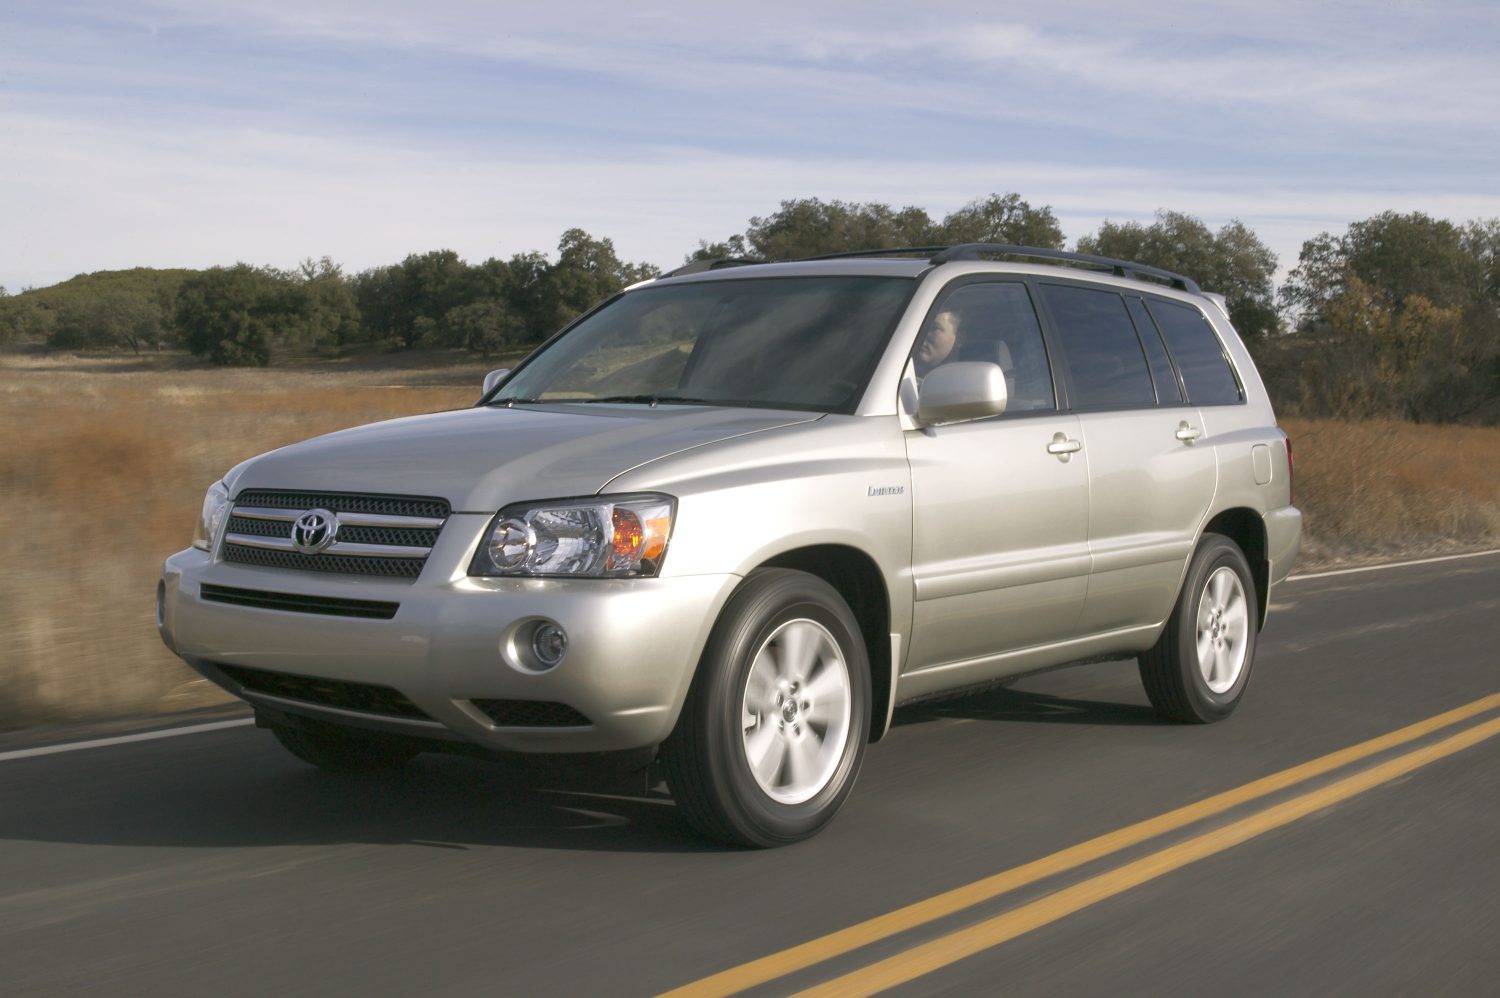 A reliable used SUV under $8,000 includes this 2007 Toyota Highlander